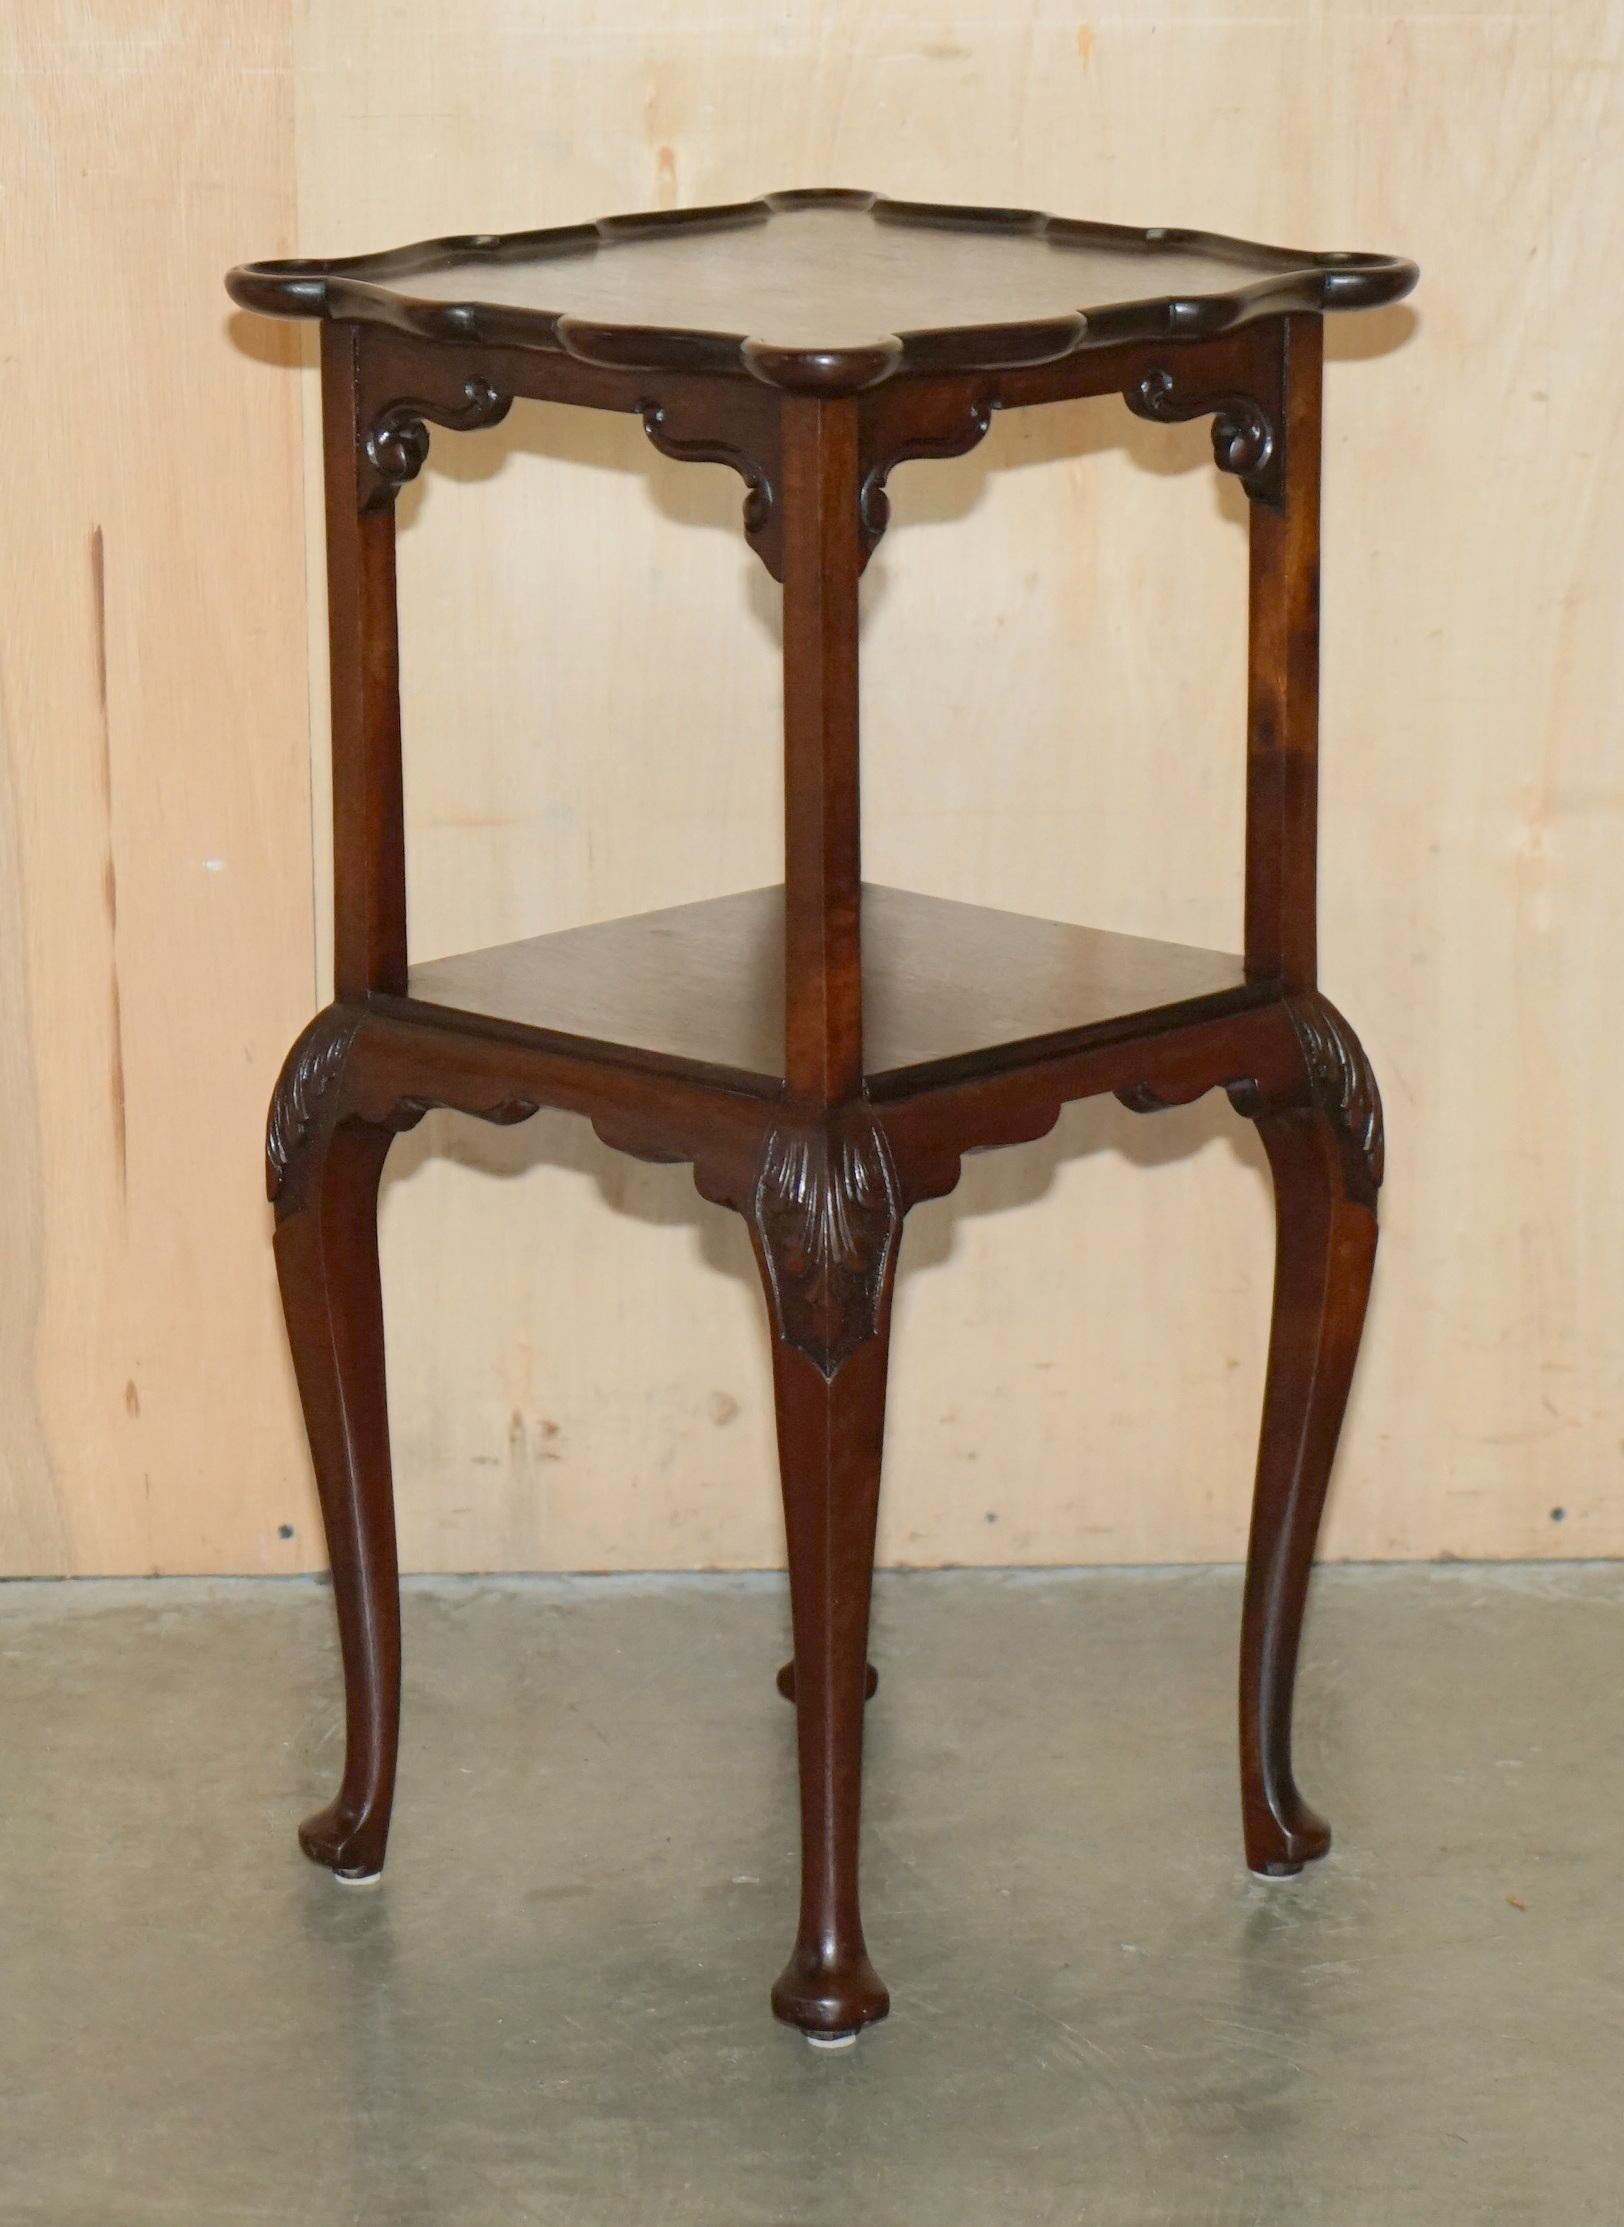 STUNNING THOMAS CHIPPENDALE Style TWO TIERED HARDWOOD SIDE END TABLEs (Chippendale) im Angebot